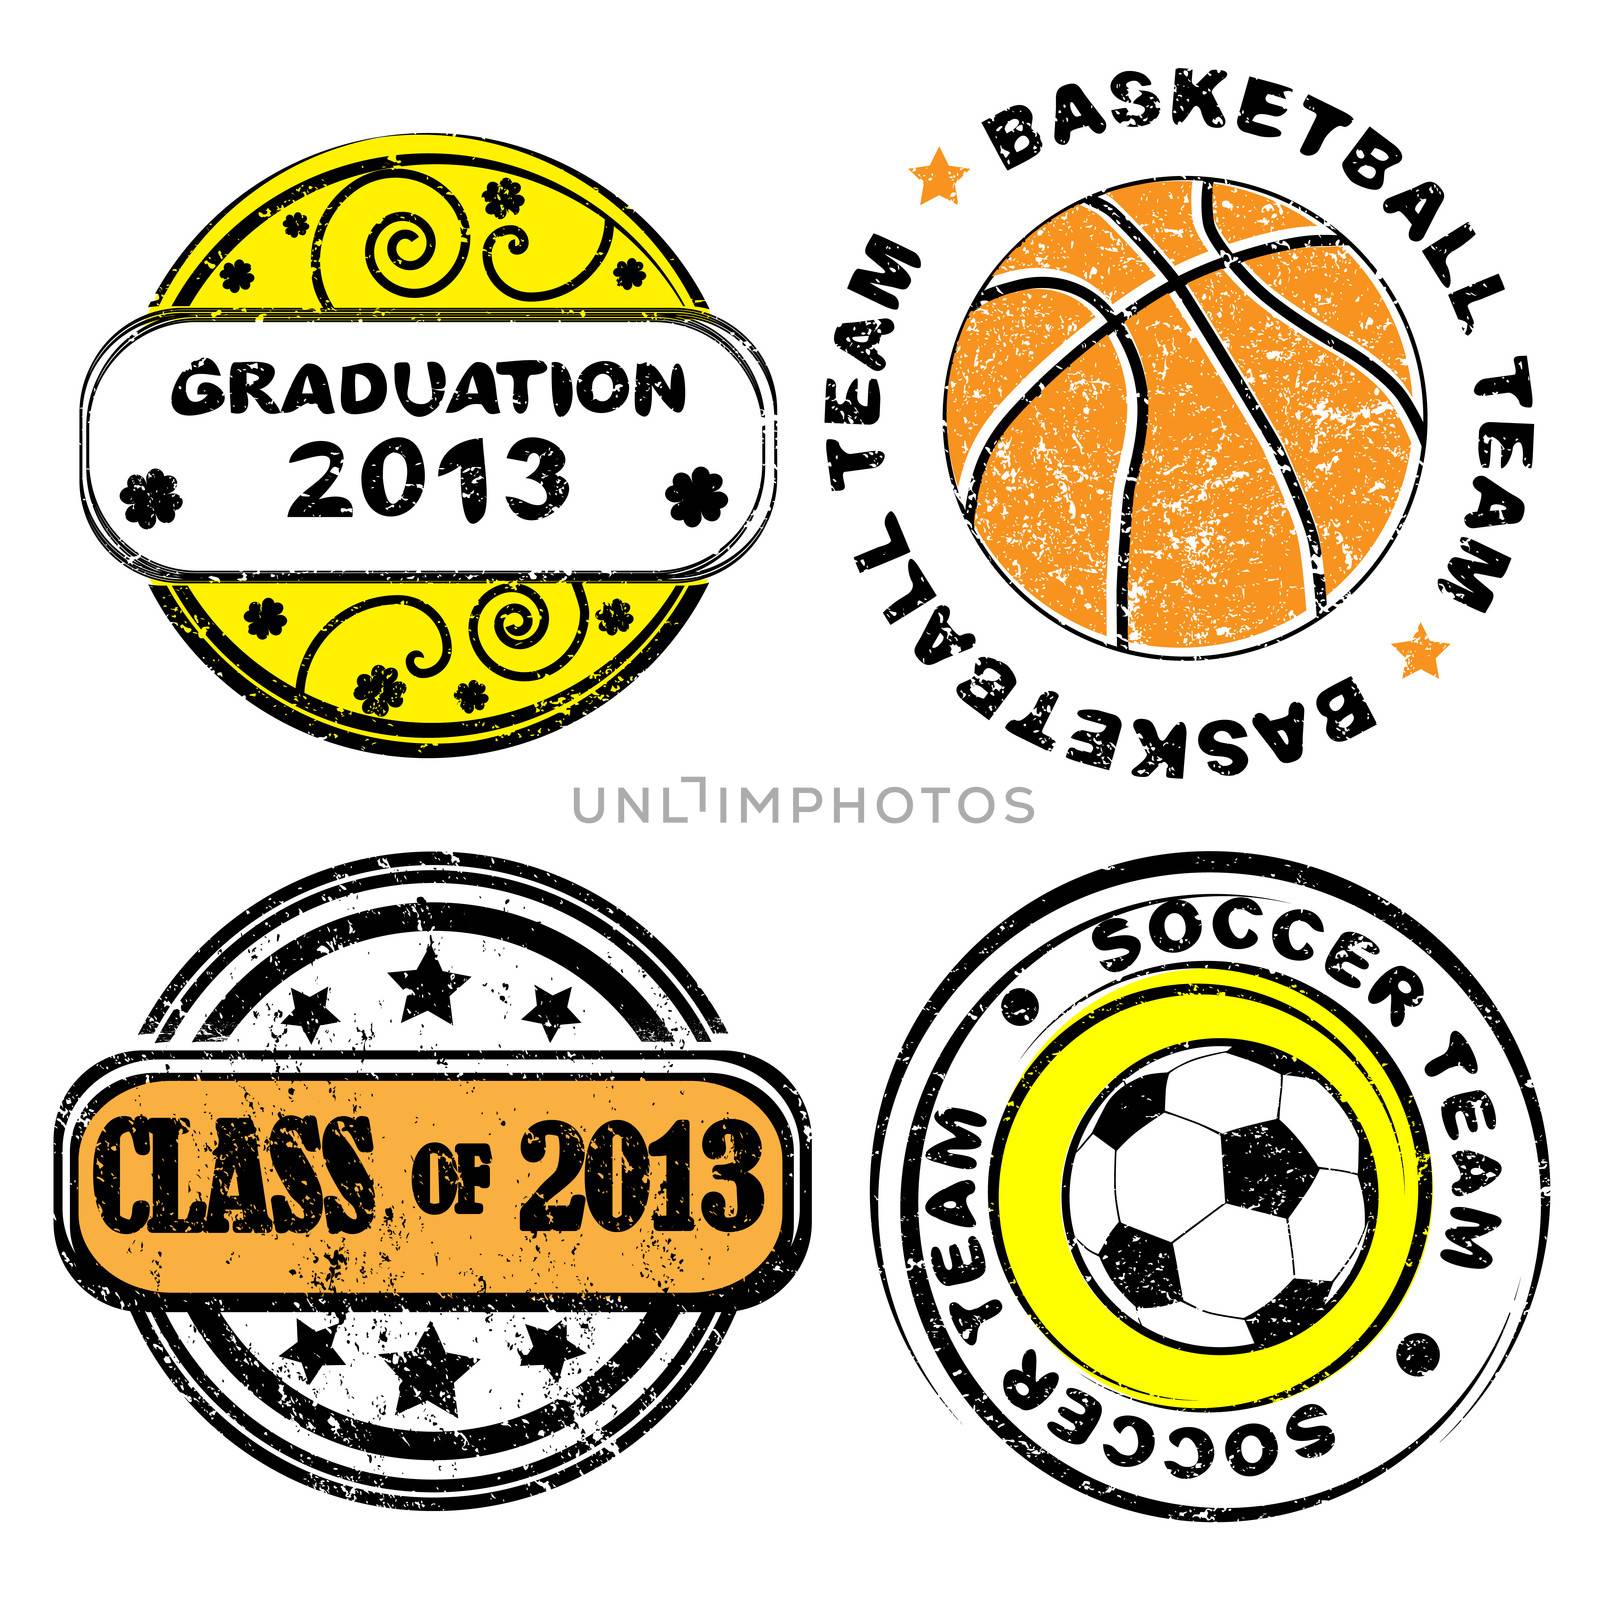 School team and graduation grungy stamps collection isolated on white